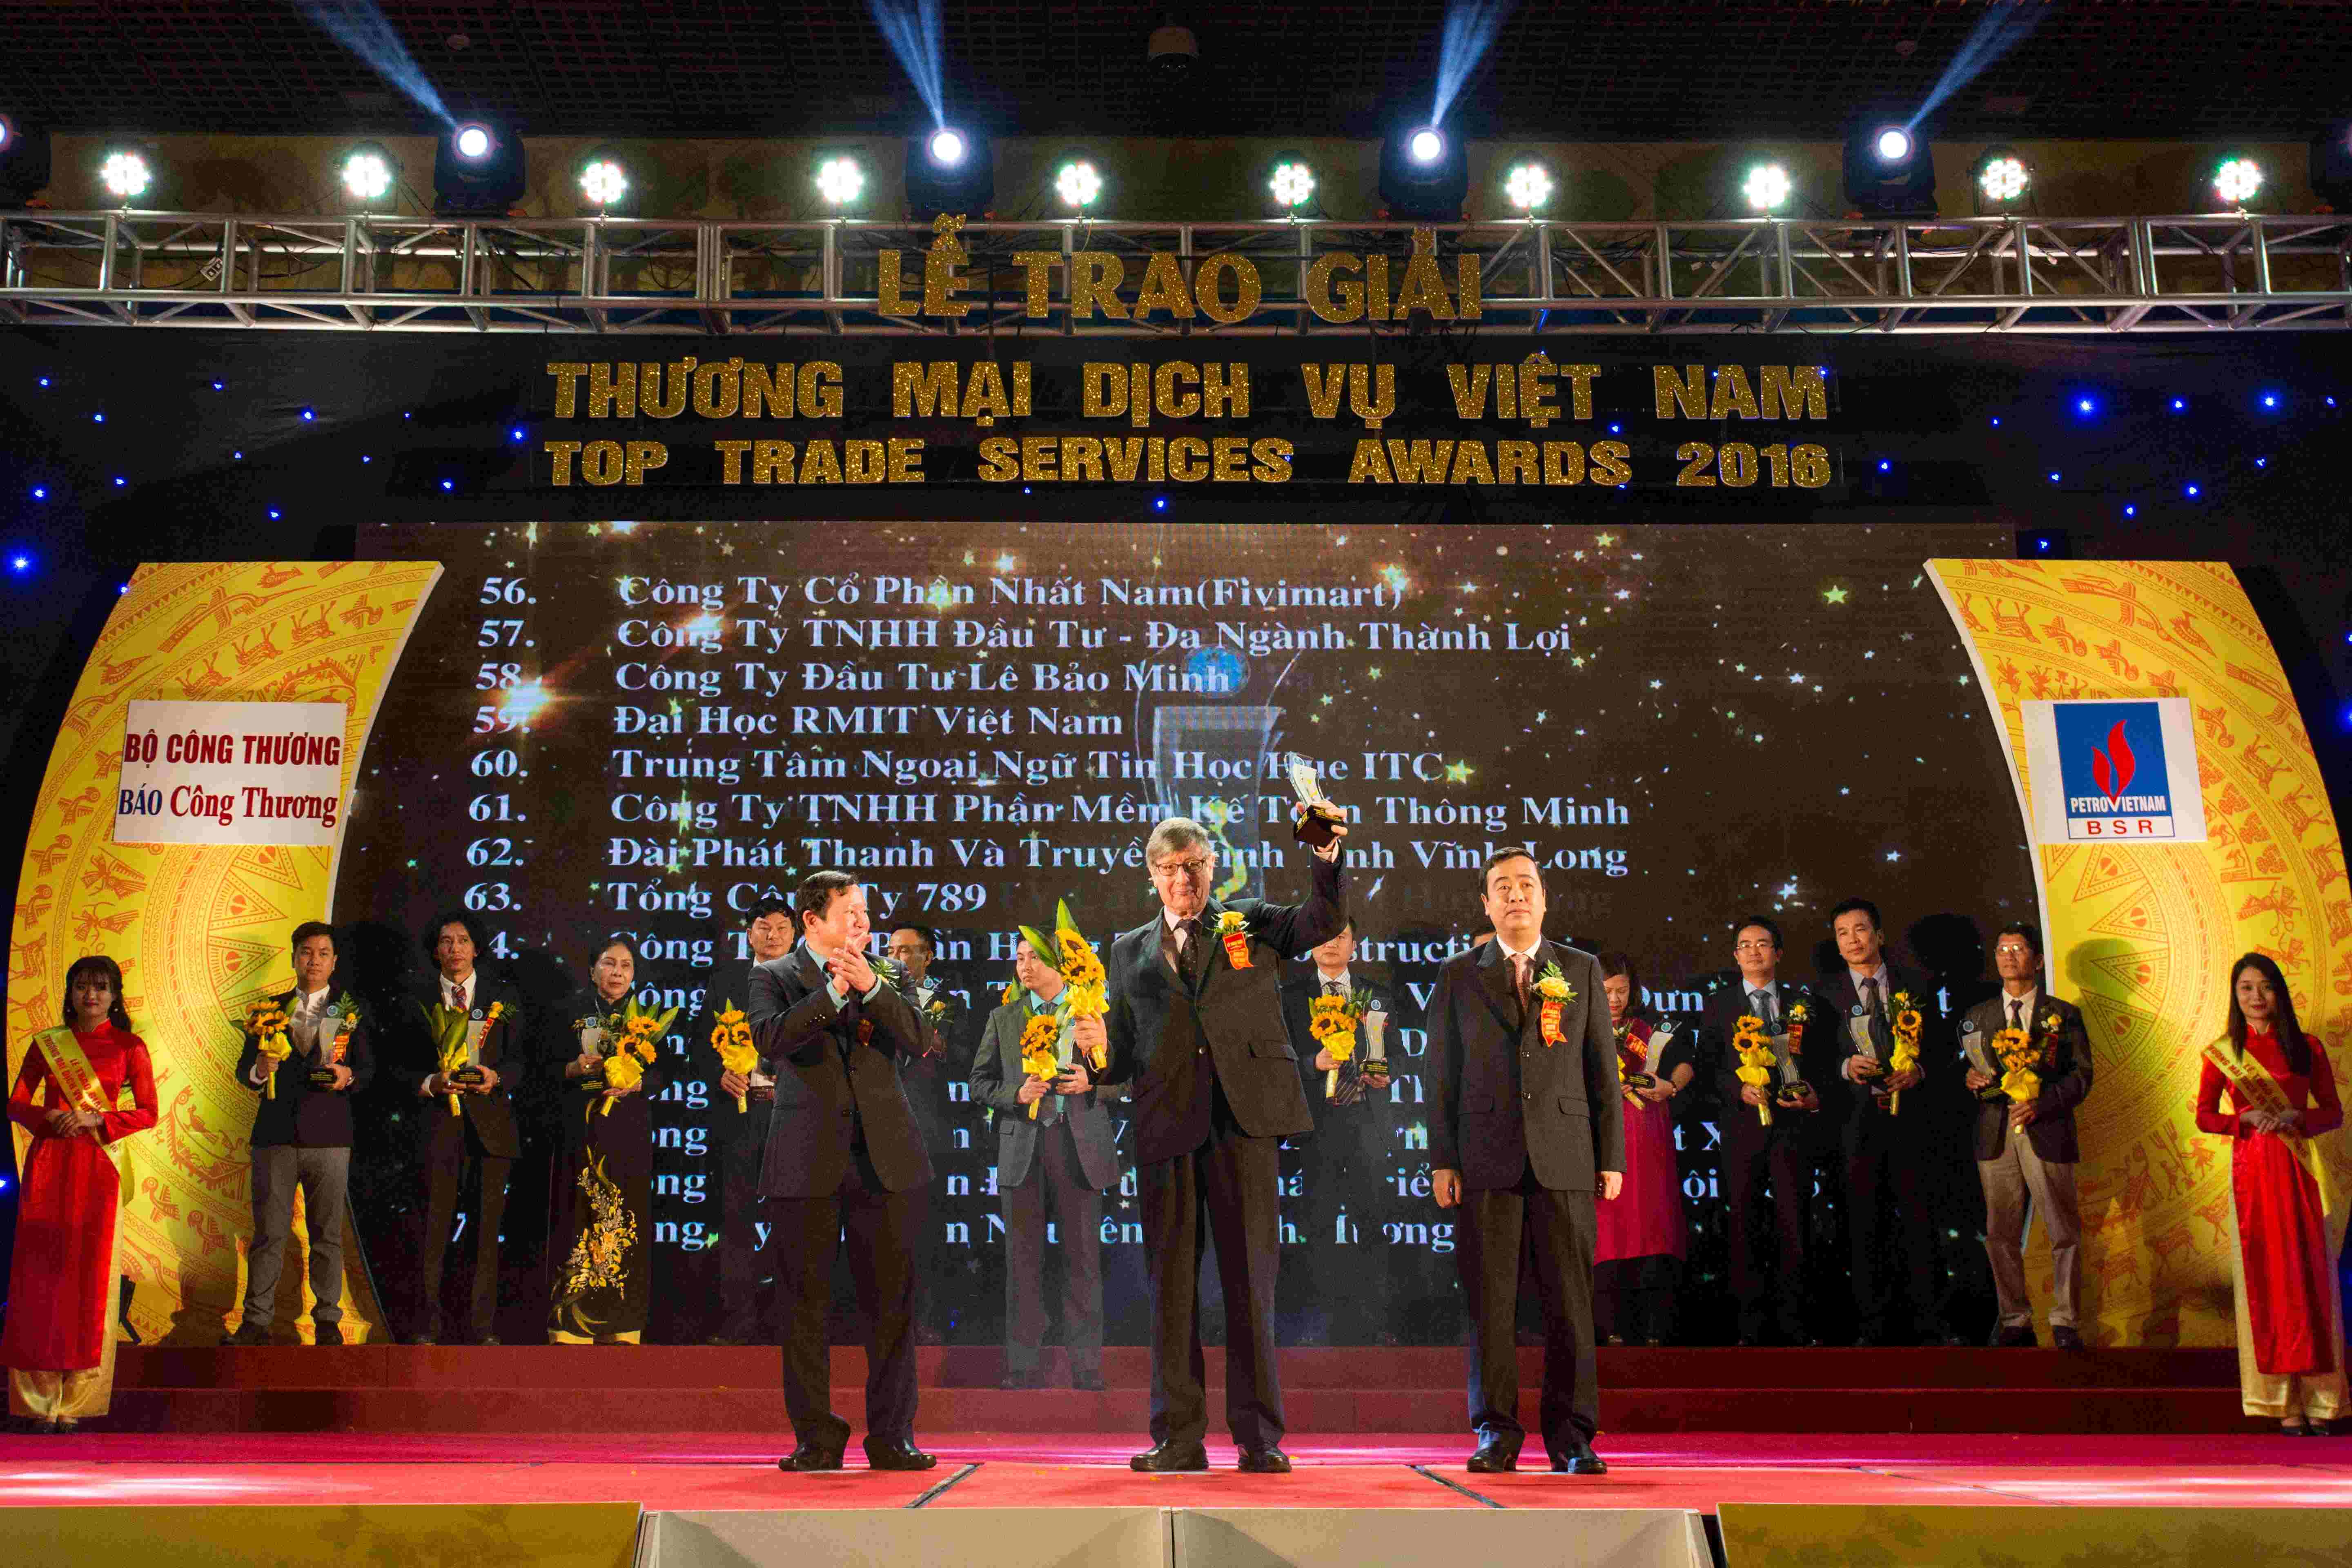 Mr Ngo Dong Hai (right), Alternative Member of Party Central Committee, Deputy Head of the Party Central Committee's Economic Commission and Mr Nguyen Huu Quy (left), Chief Editor of Industry and Trade newspaper presented the award to RMIT Vietnam’s Director of Communications and Events Mr Conrad Ożóg. 